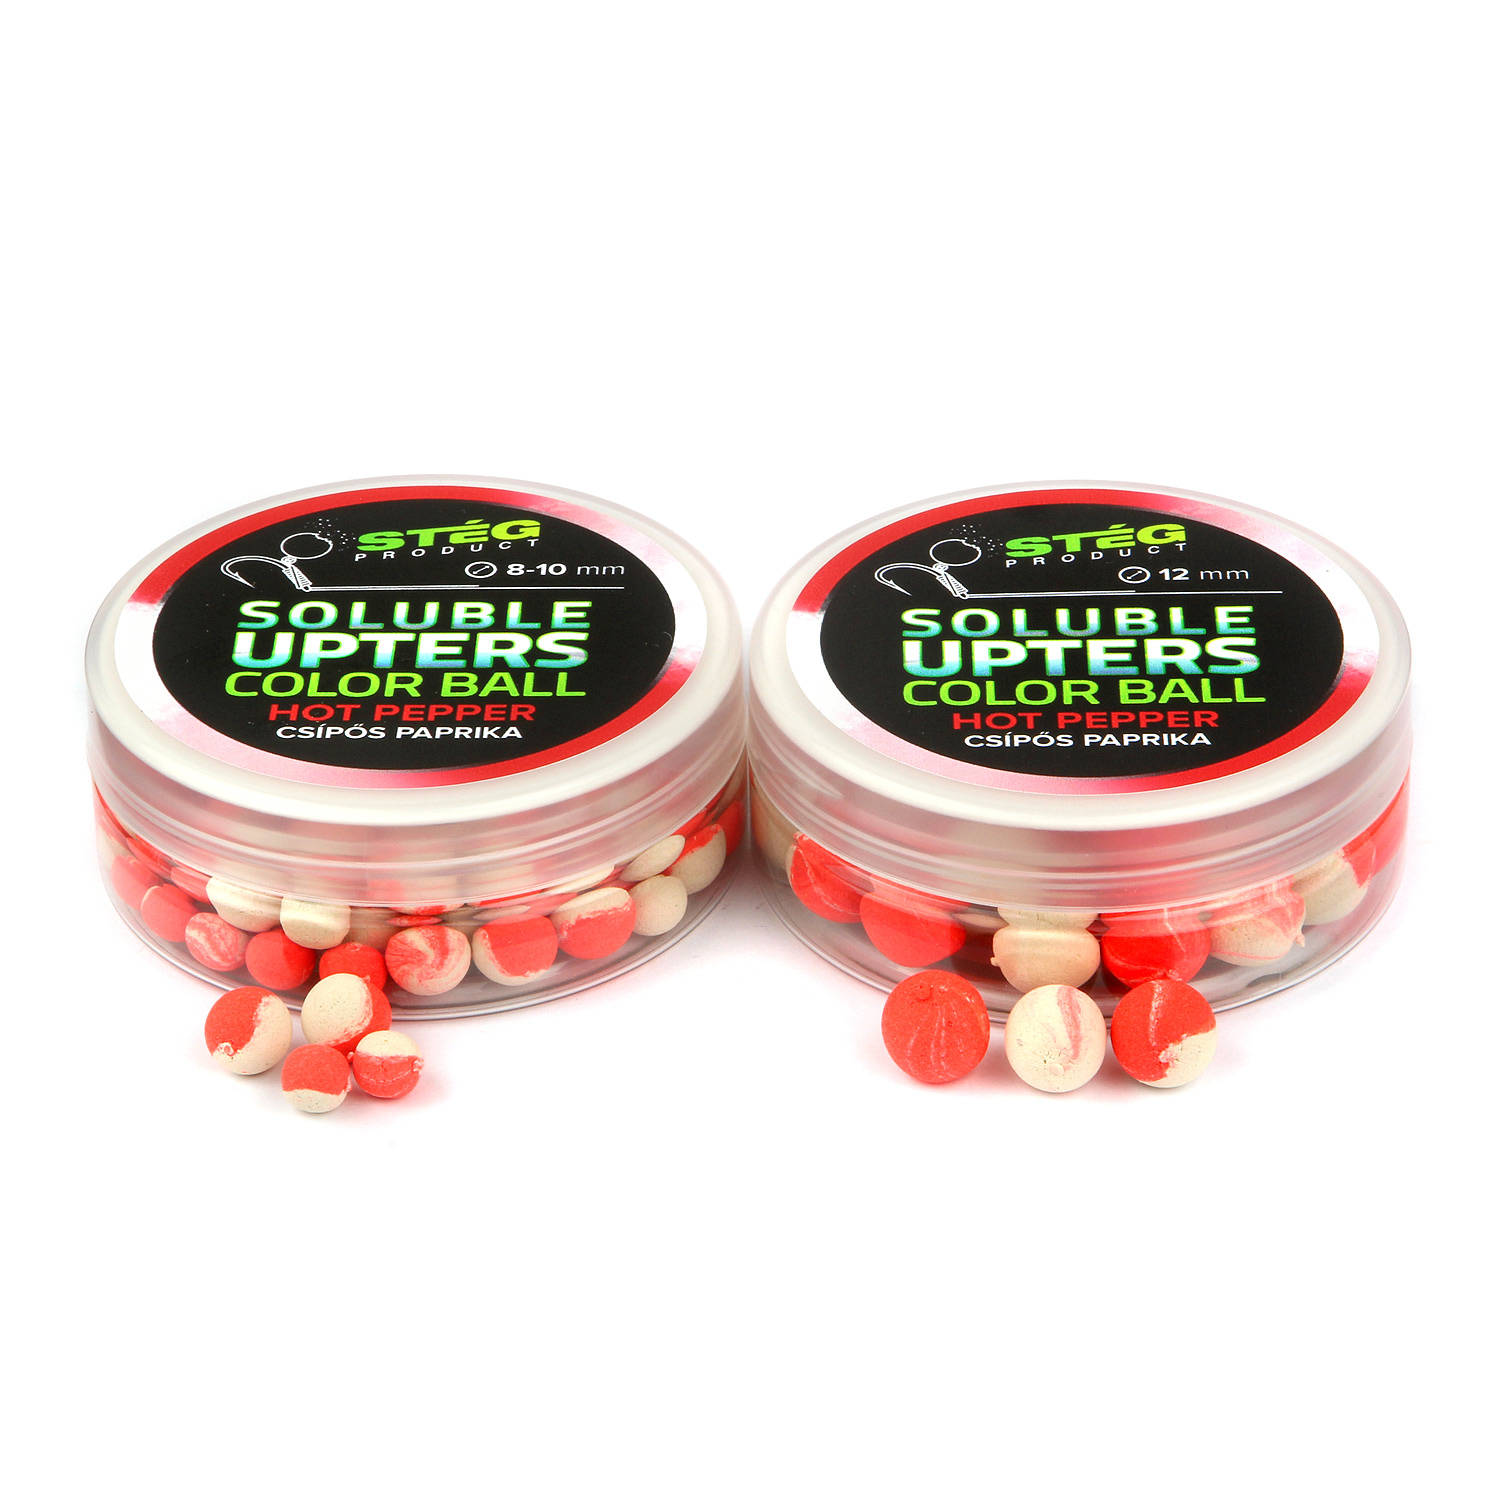 Stg Product Soluble Upters Color Ball 12mm Hot Pepper 30g